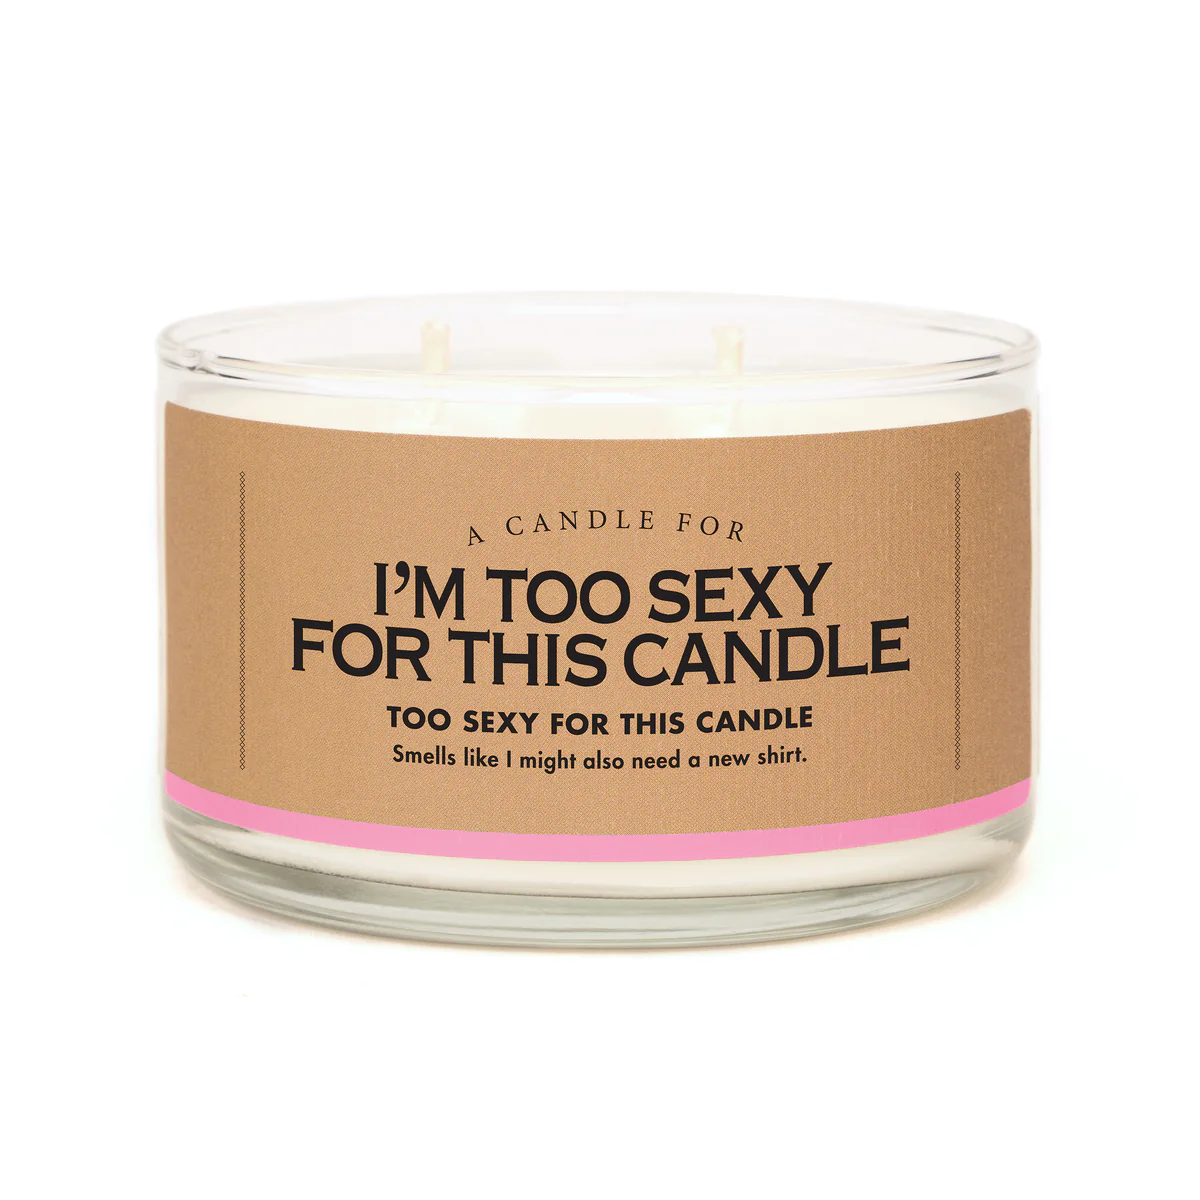 A Candle for I'm Too Sexy - Heart of the Home PA